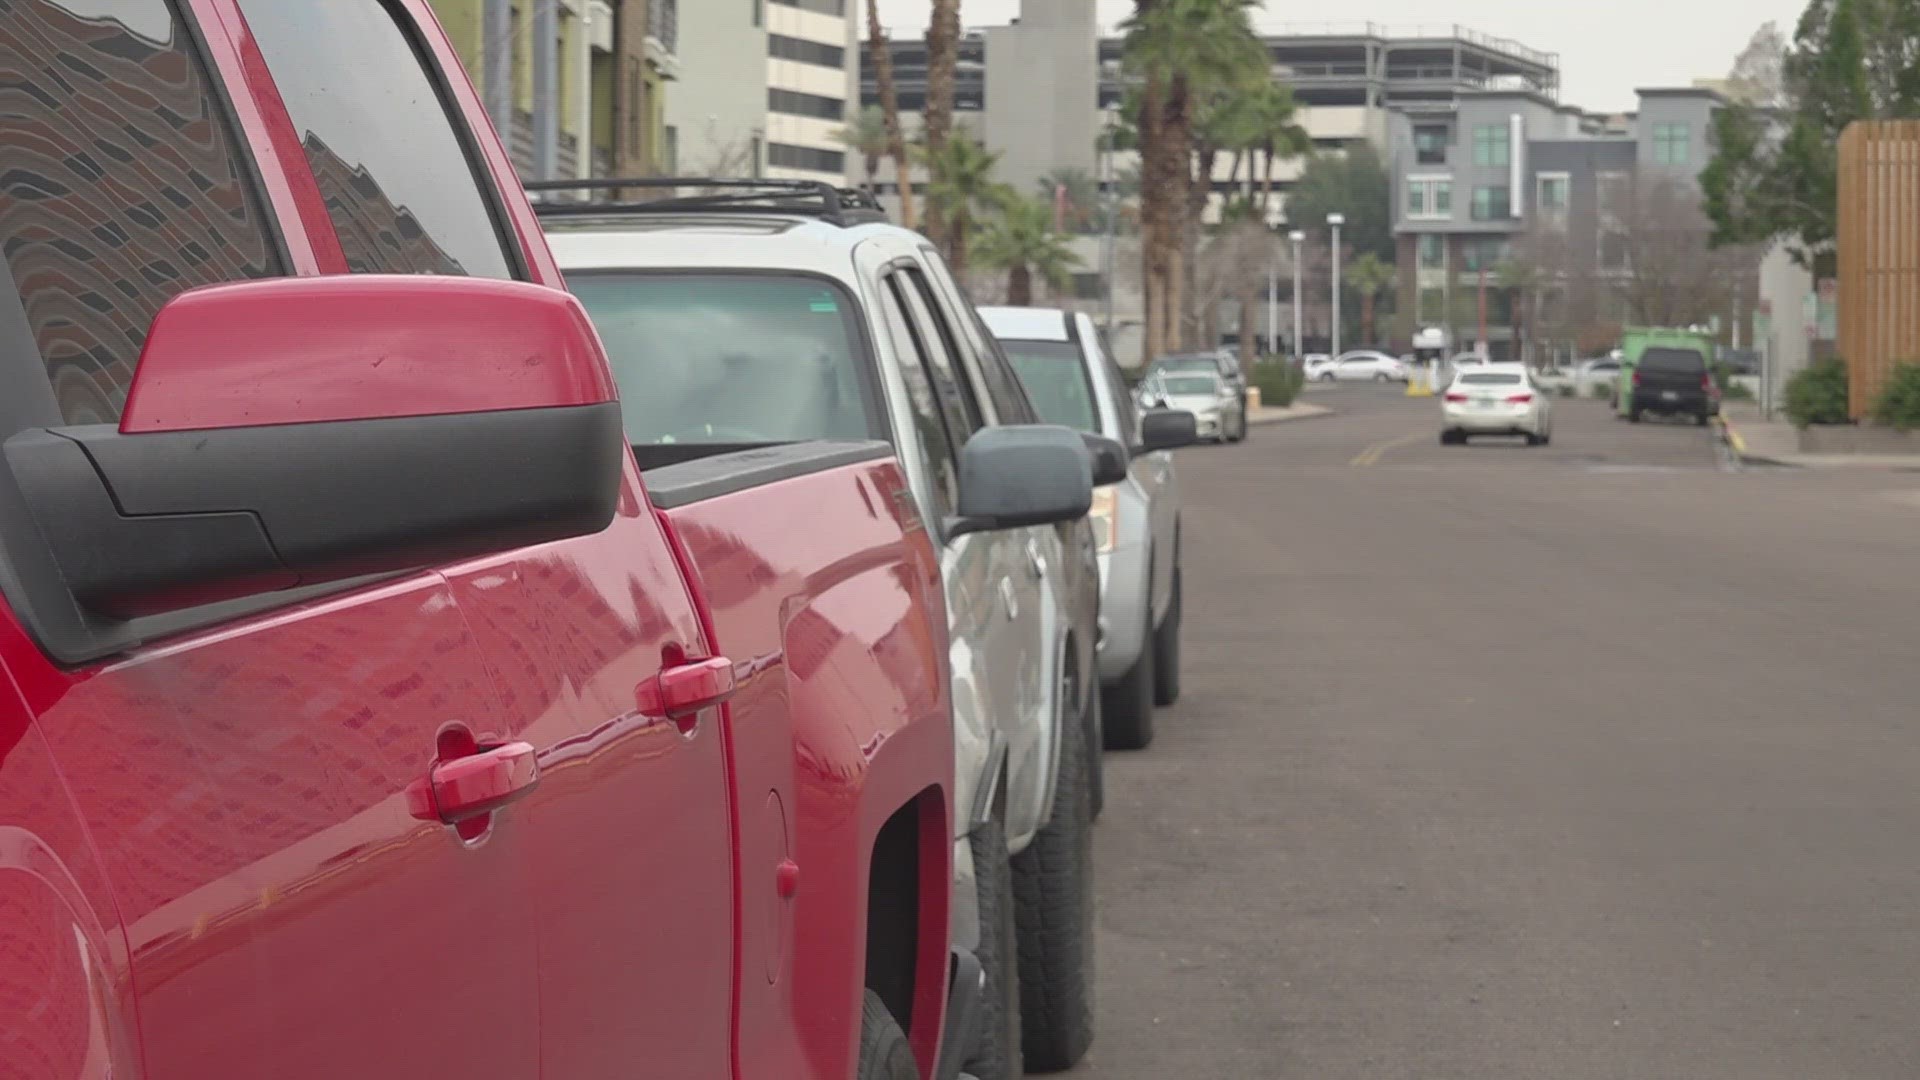 The Phoenix City Council approved a plan to reduce the required number of parking spots for new multifamily housing.